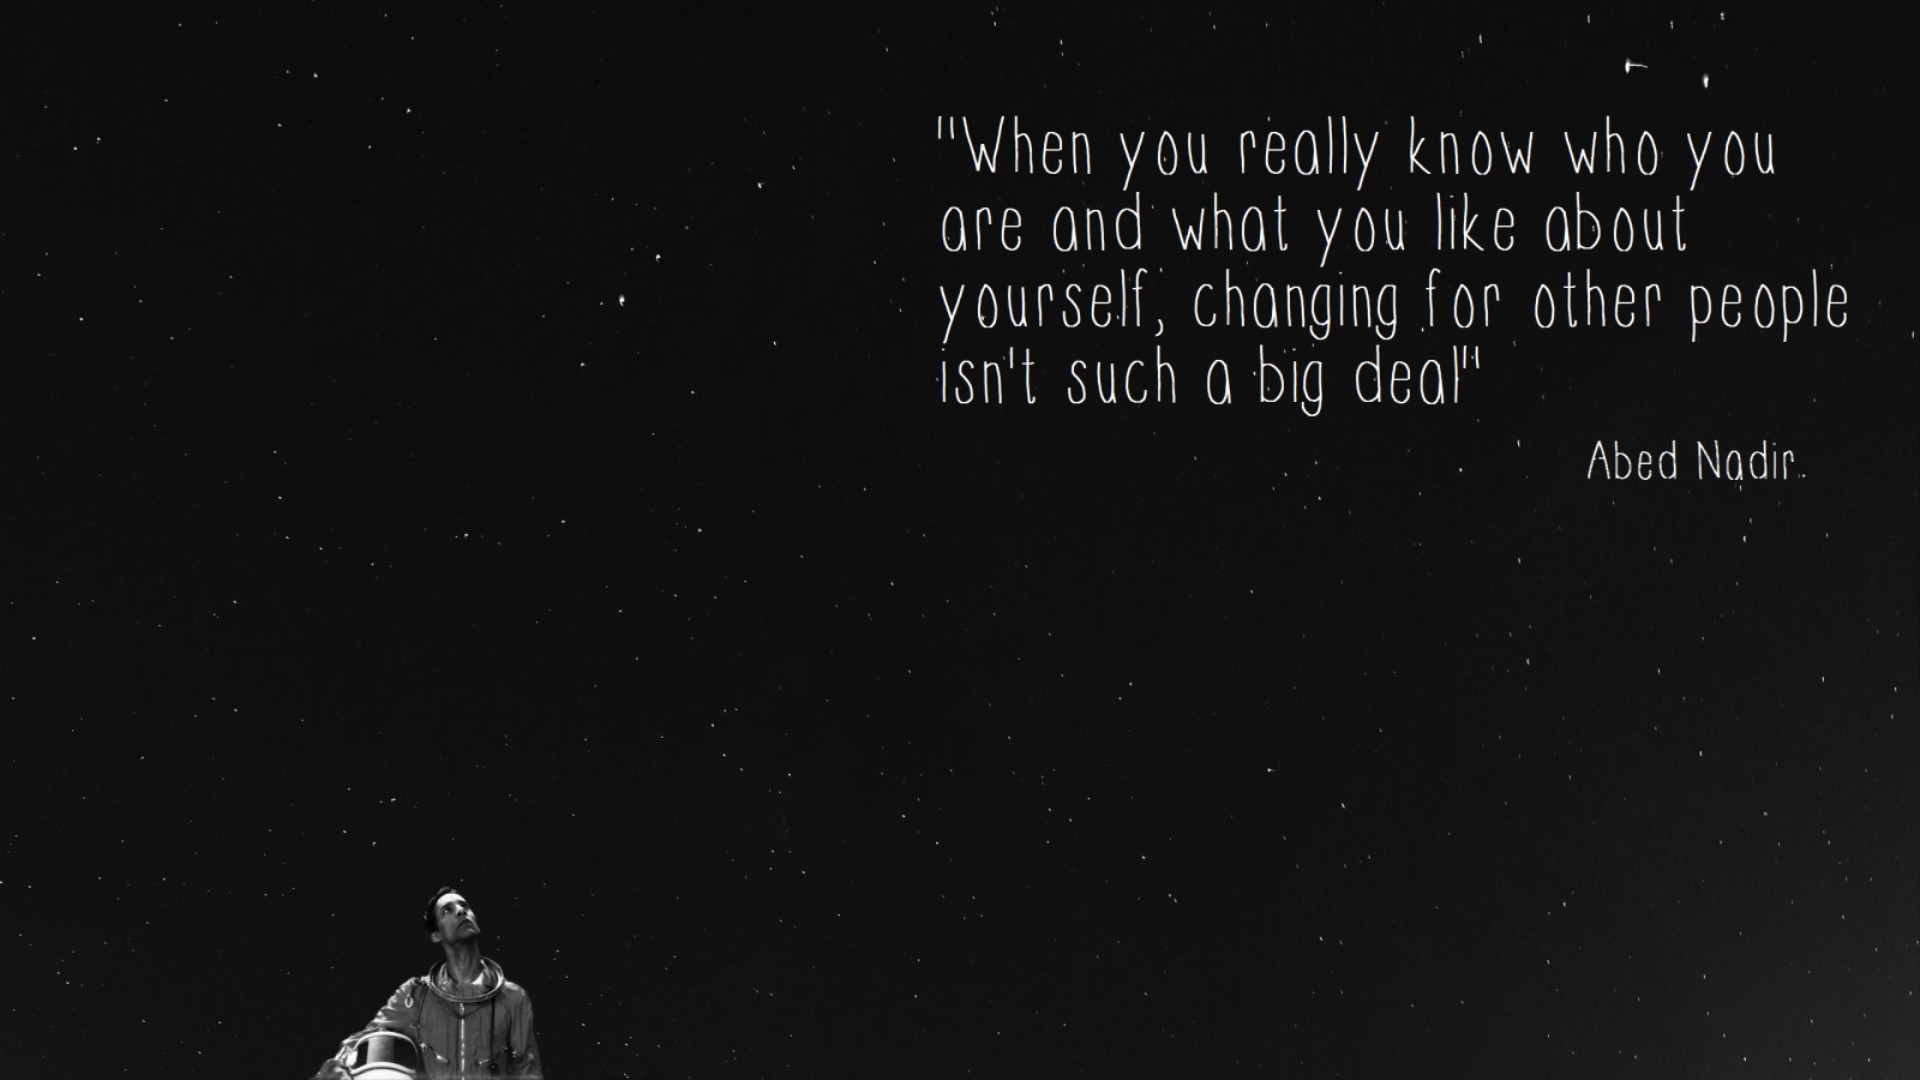 General 1920x1080 Community typography sky motivational quote Danny Pudi Abed Nadir digital art text simple background